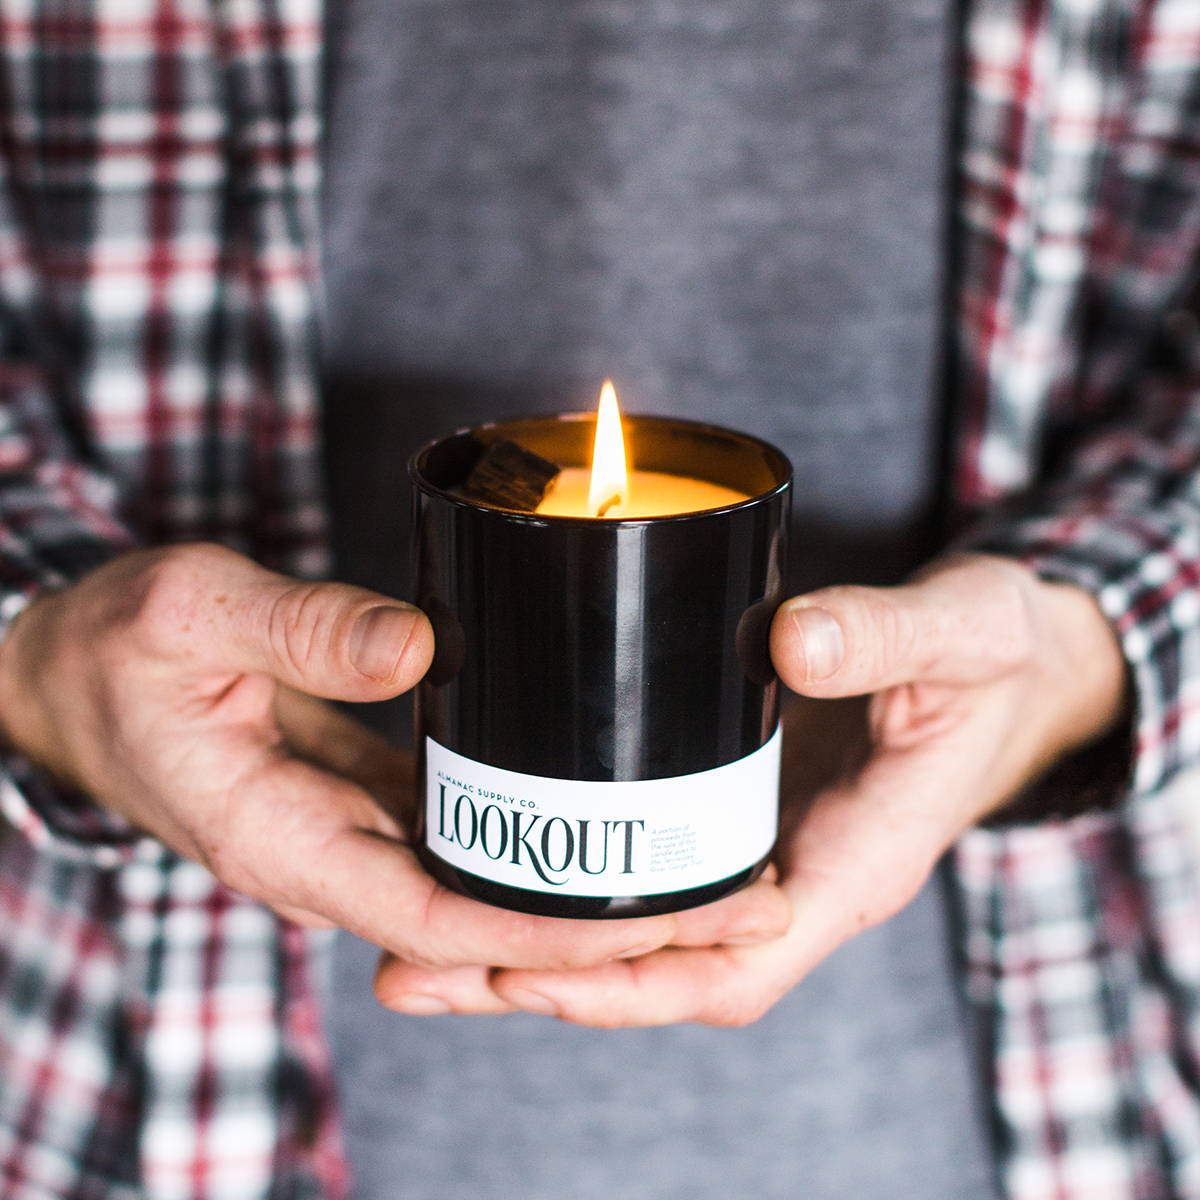 Hands holding a lit Lookout Candle, named after the Chattanooga mountain